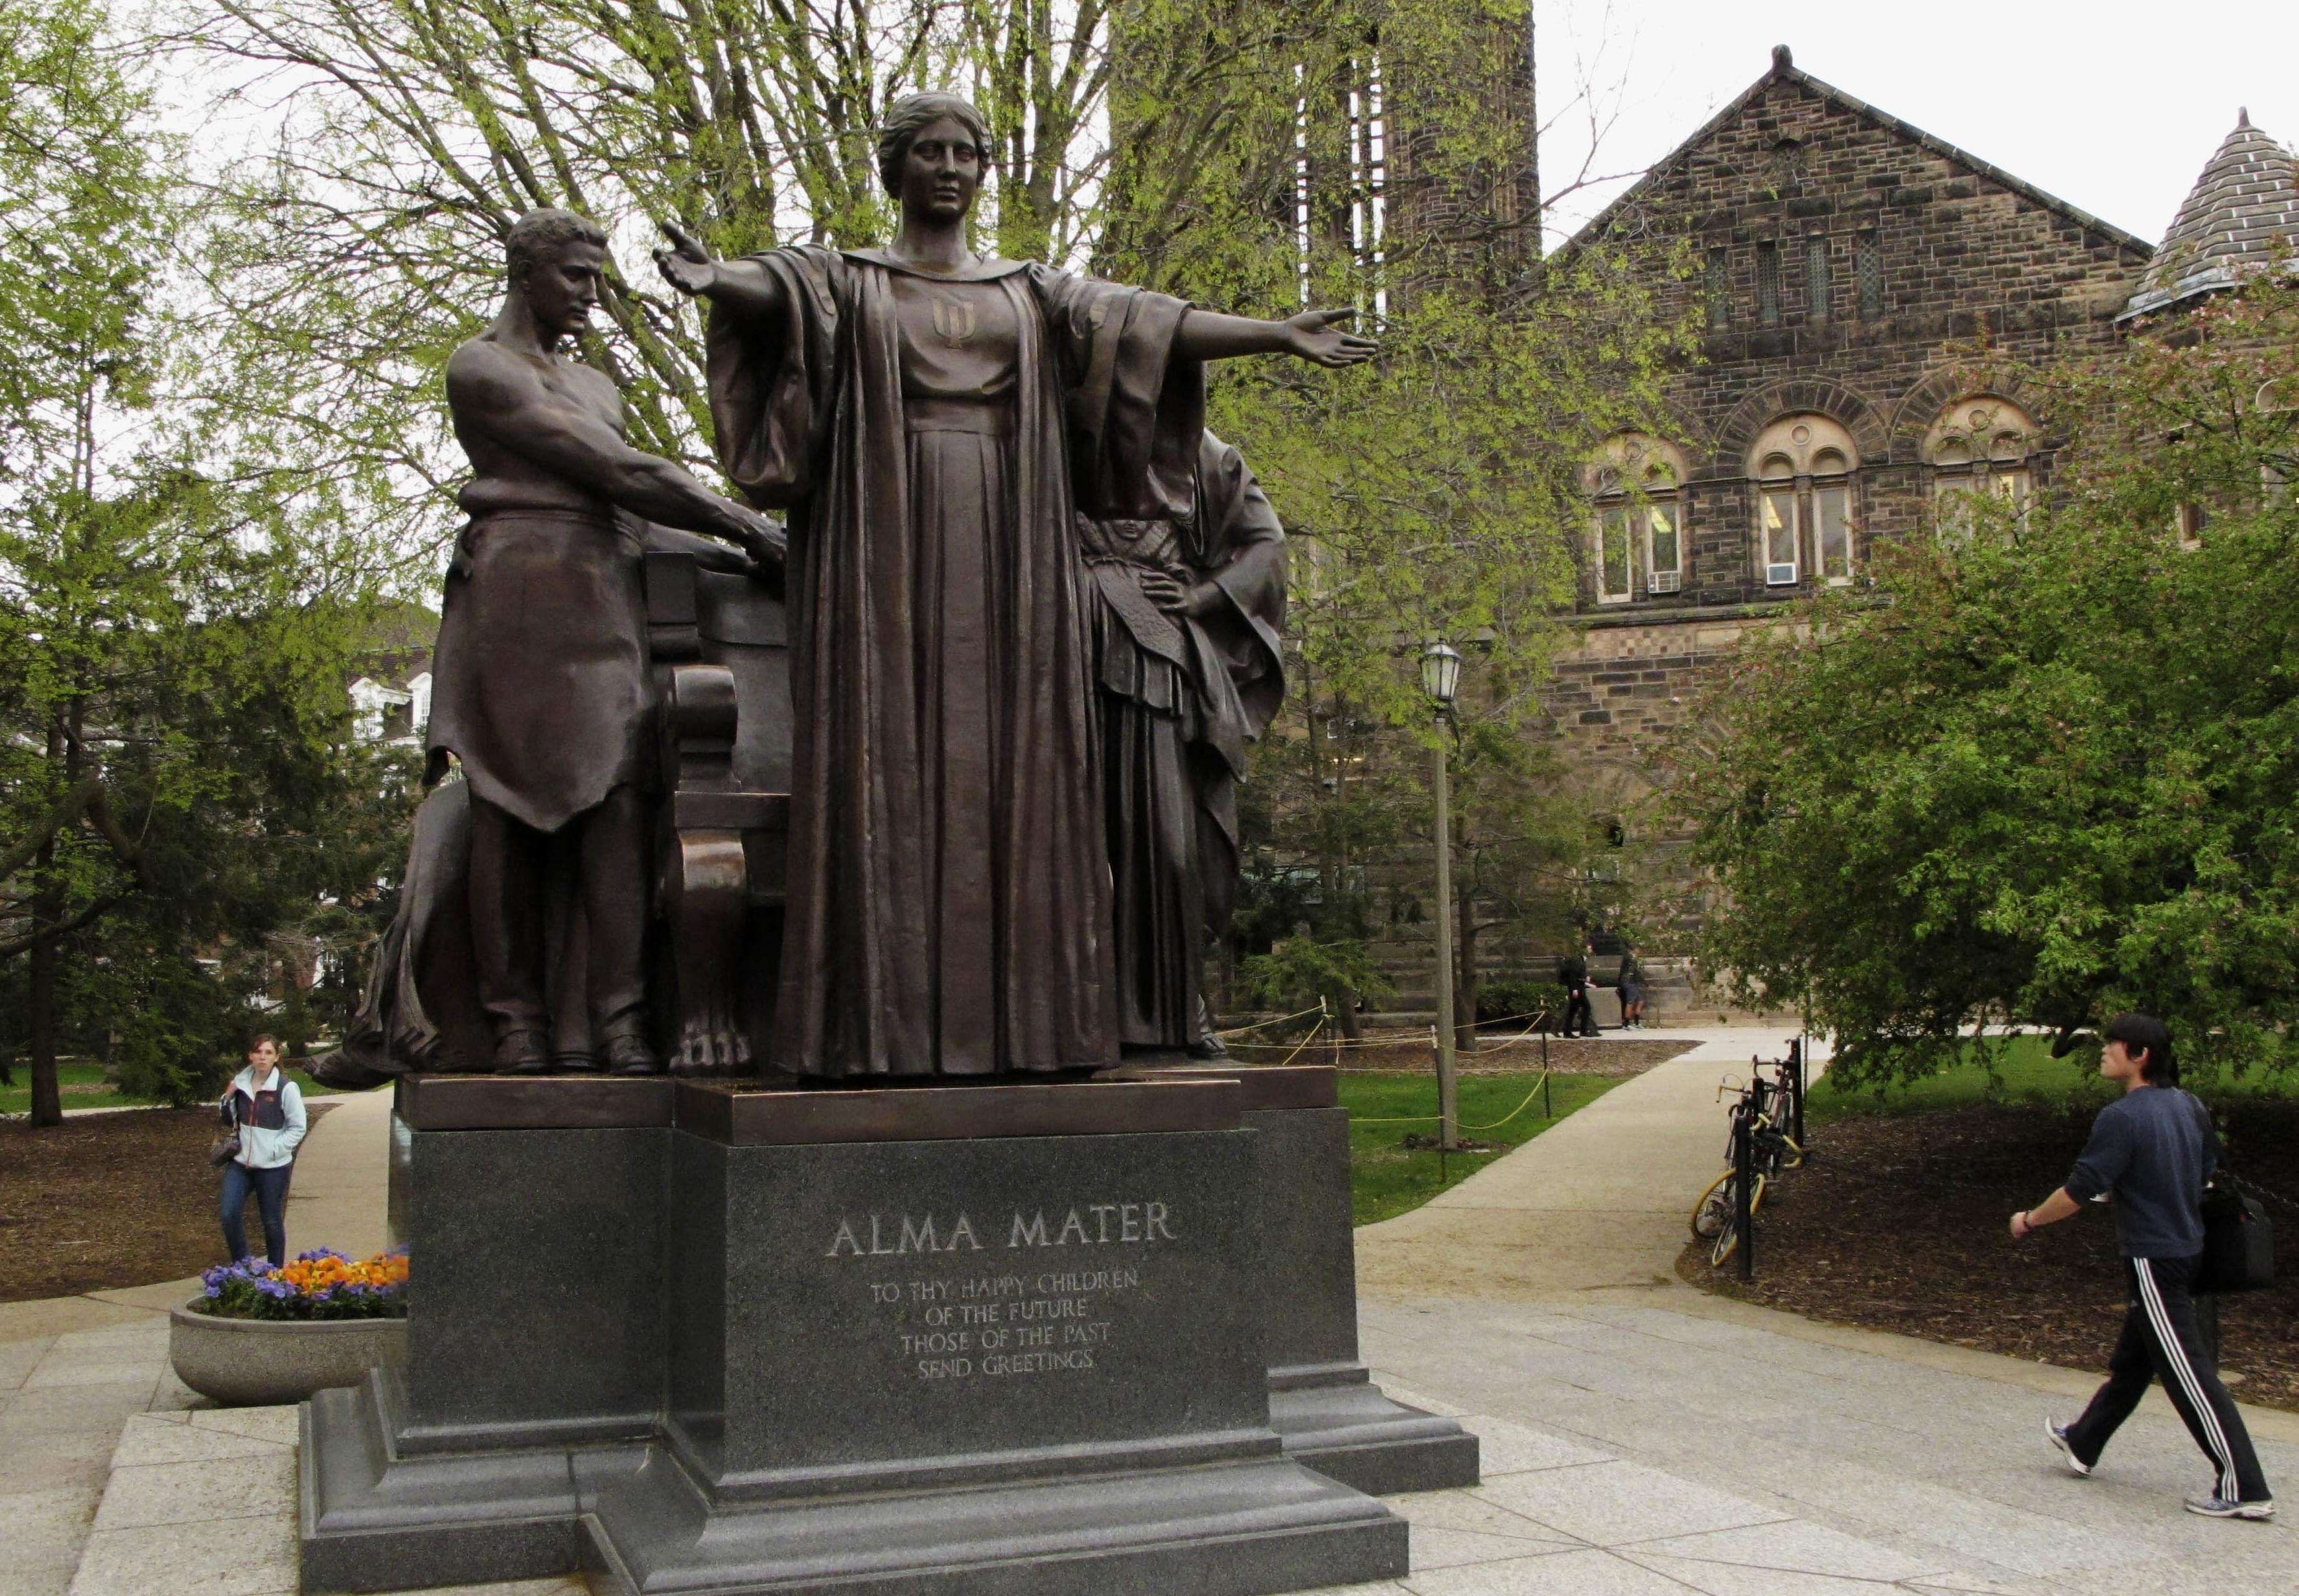 Students walk past the Alma Mater statue on the University of Illinois Urbana campus in April 2014.